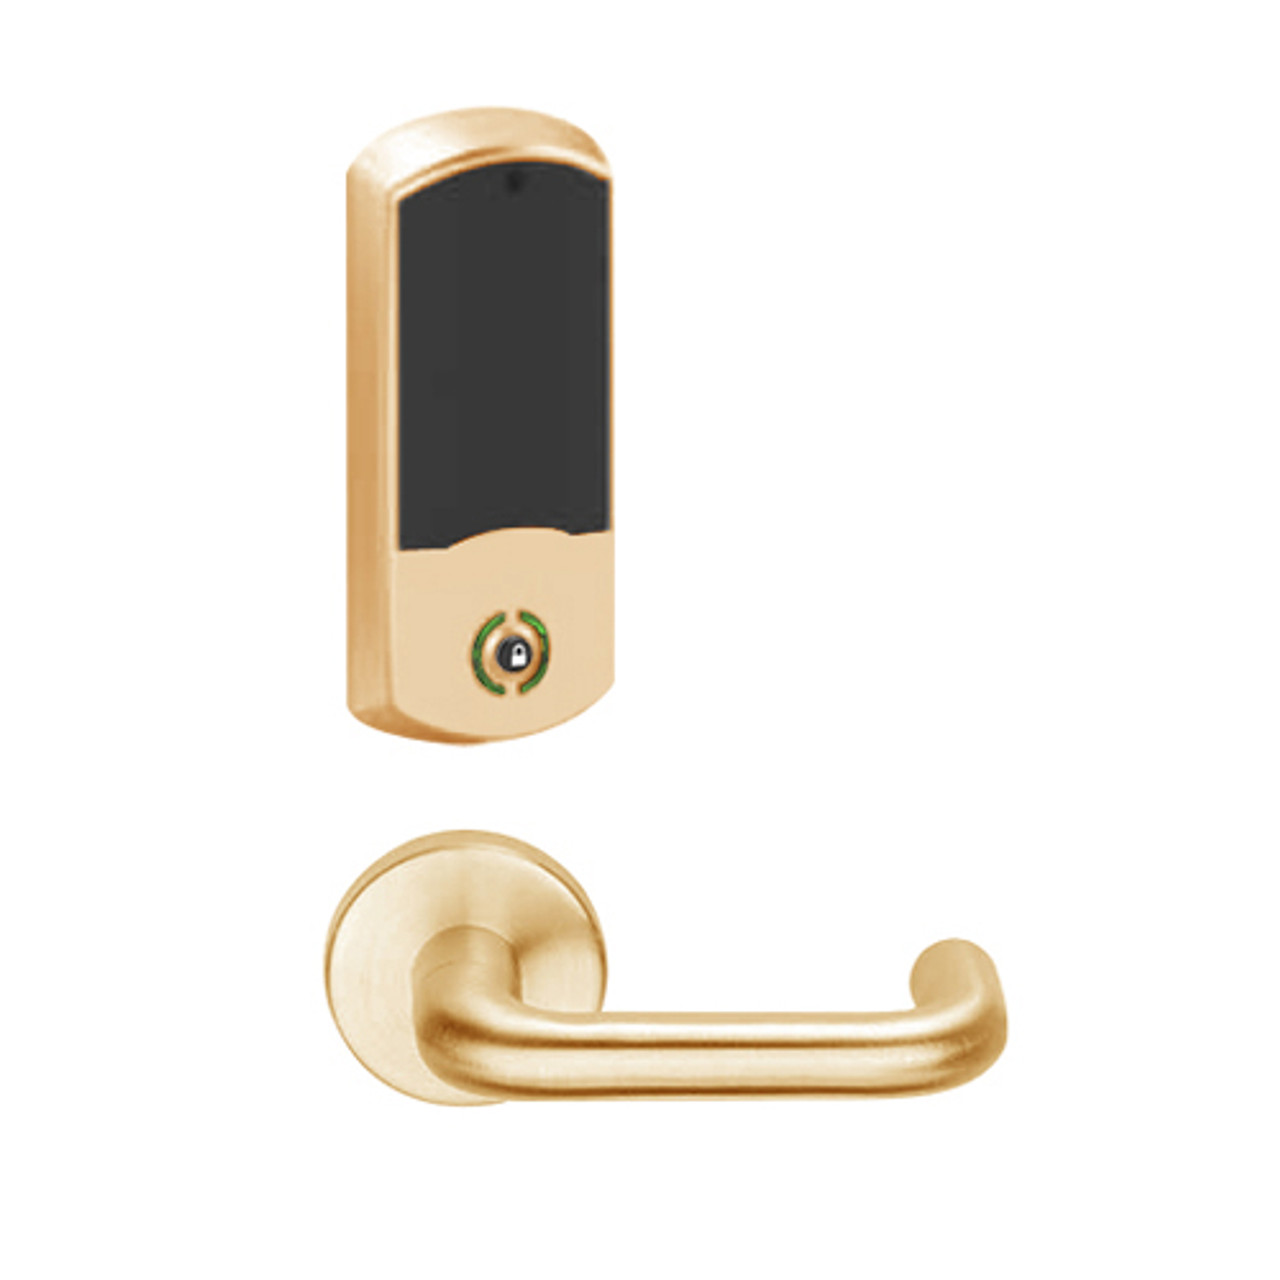 LEMB-GRW-J-03-612-00B Schlage Privacy/Office Wireless Greenwich Mortise Lock with Push Button & LED Indicator and Tubular Lever Prepped for FSIC in Satin Bronze